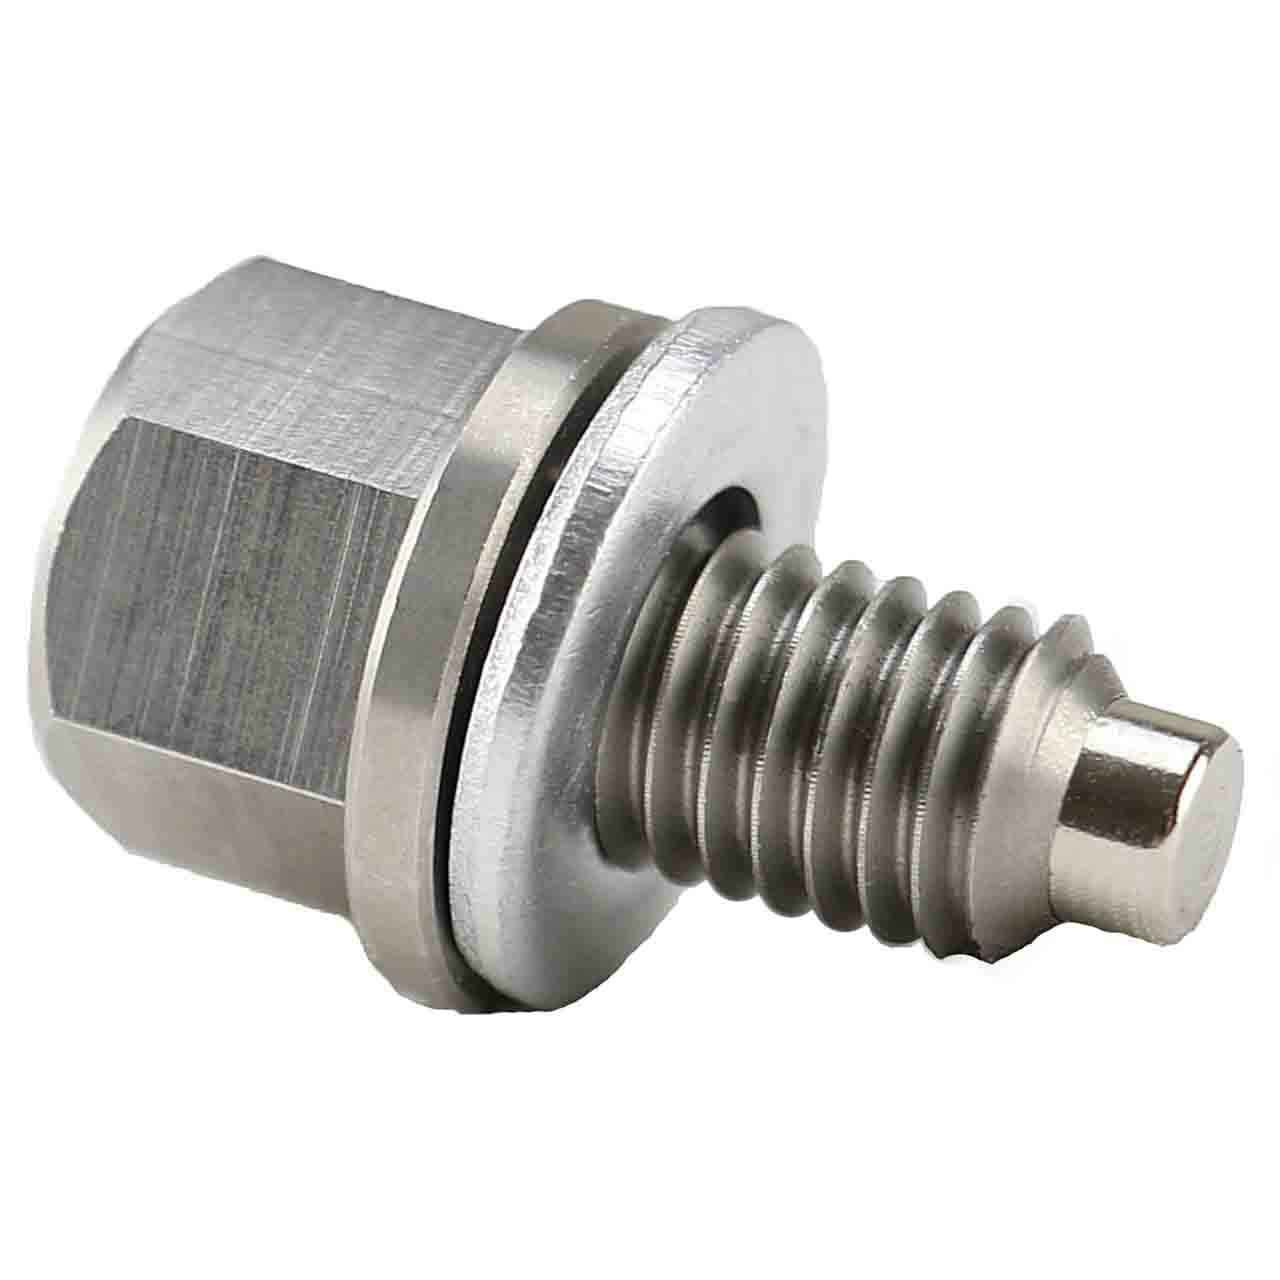 3020-472 for Arctic Cat - Stainless Steel Magnetic Oil Drain Plug with Neodymium Magnet - Made In USA